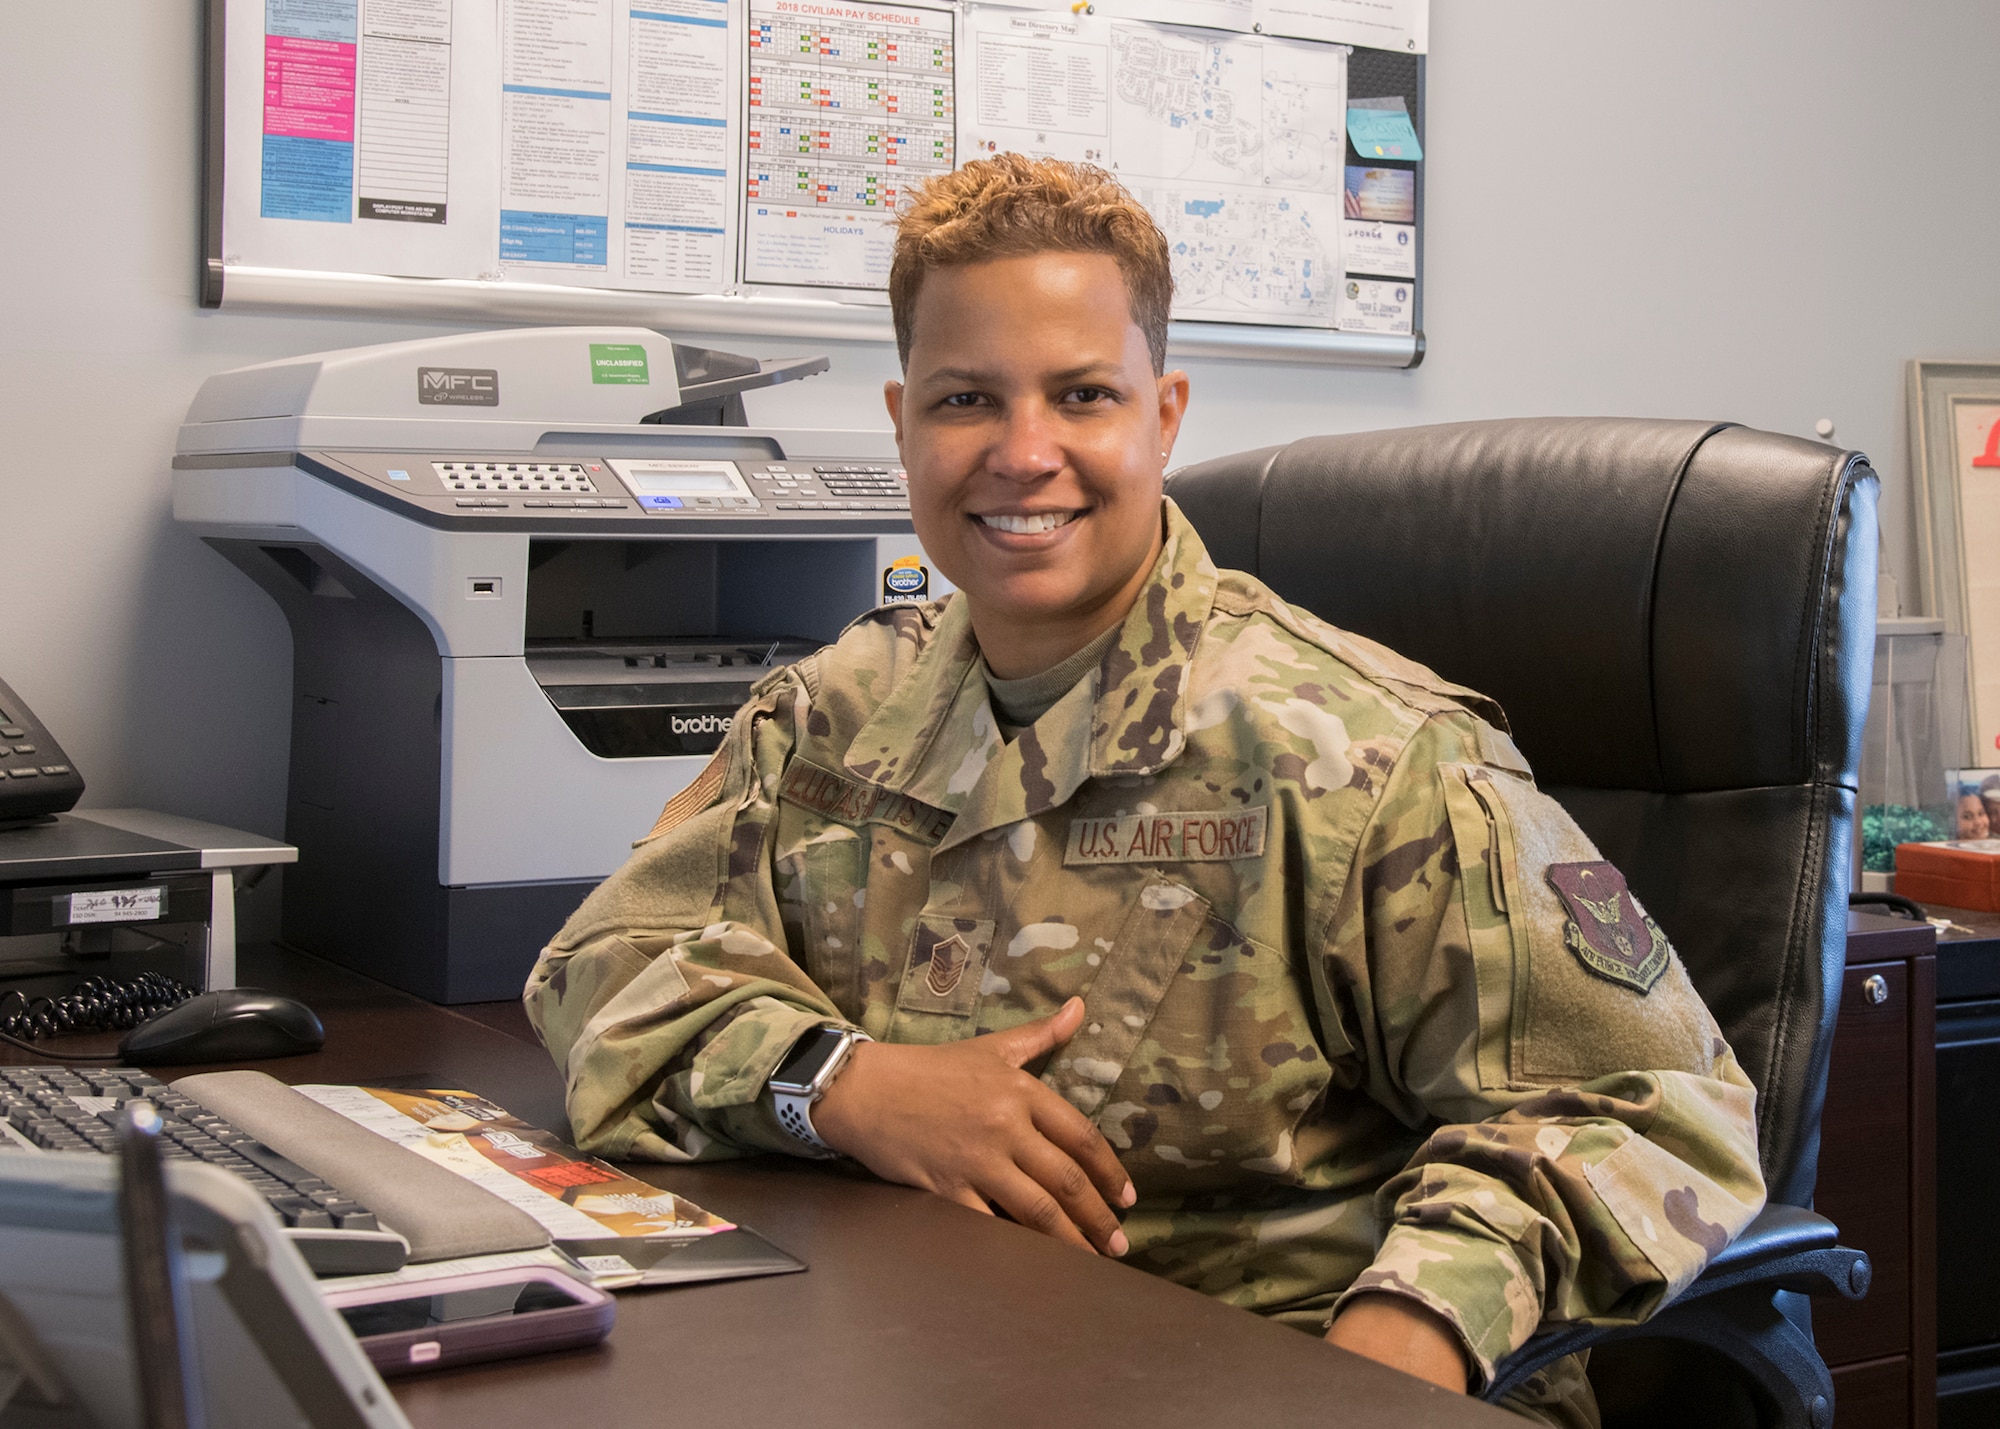 Master Sgt. Heather Lucas-Baptiste, Dover Air Force Base’s Air Force Reserve in-service recruiter, sits in her office at the Visitors Center July 22, 2019, at Dover Air Force Base, Del. Lucas-Baptiste assists Airmen transitioning from active duty to the reserves through the Palace Chase and Palace Front programs. (U.S. Air Force photo by Staff Sgt. Zoe Russell)